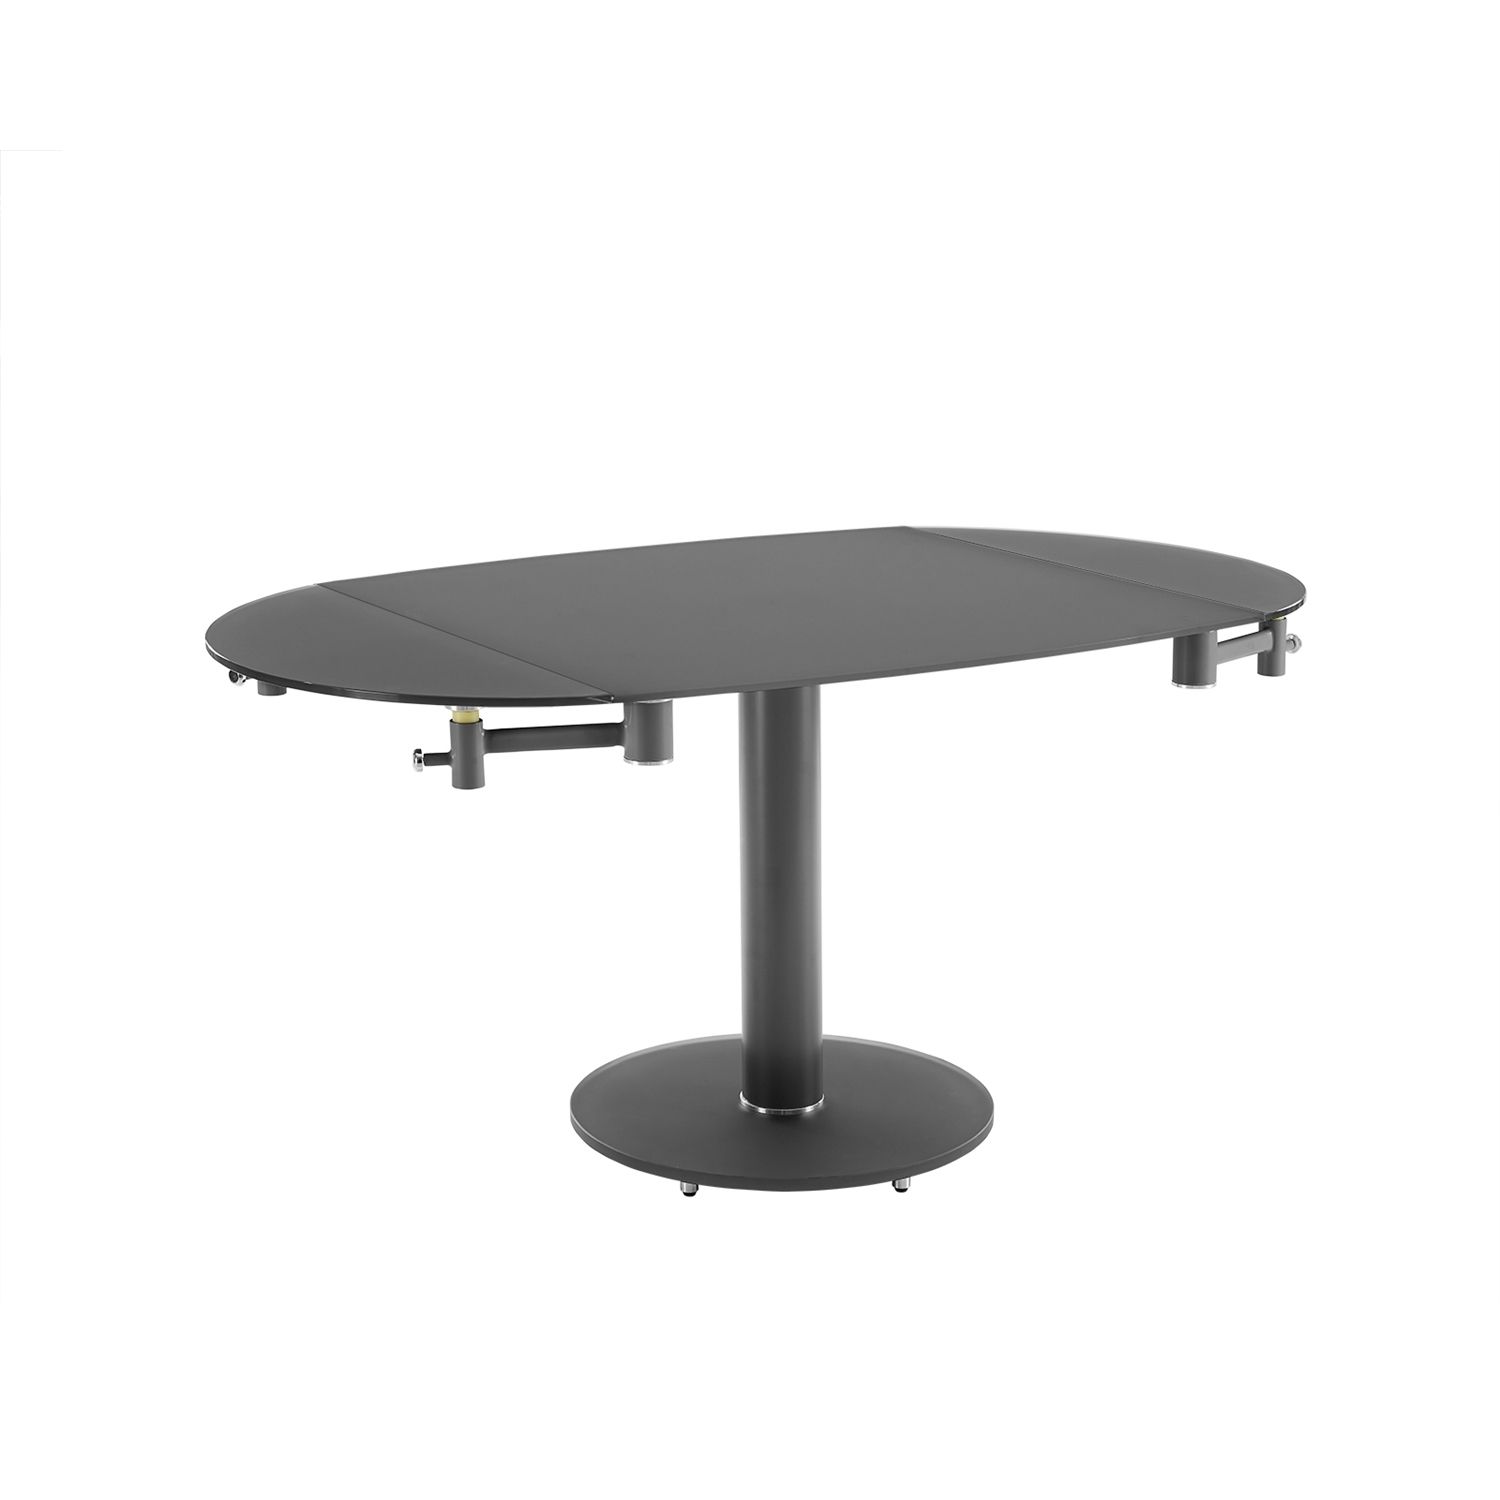 Casabianca Furniture Thao Dining Table In Gray Glass With Polished Pertaining To Stainless Steel And Gray Desks (View 4 of 15)